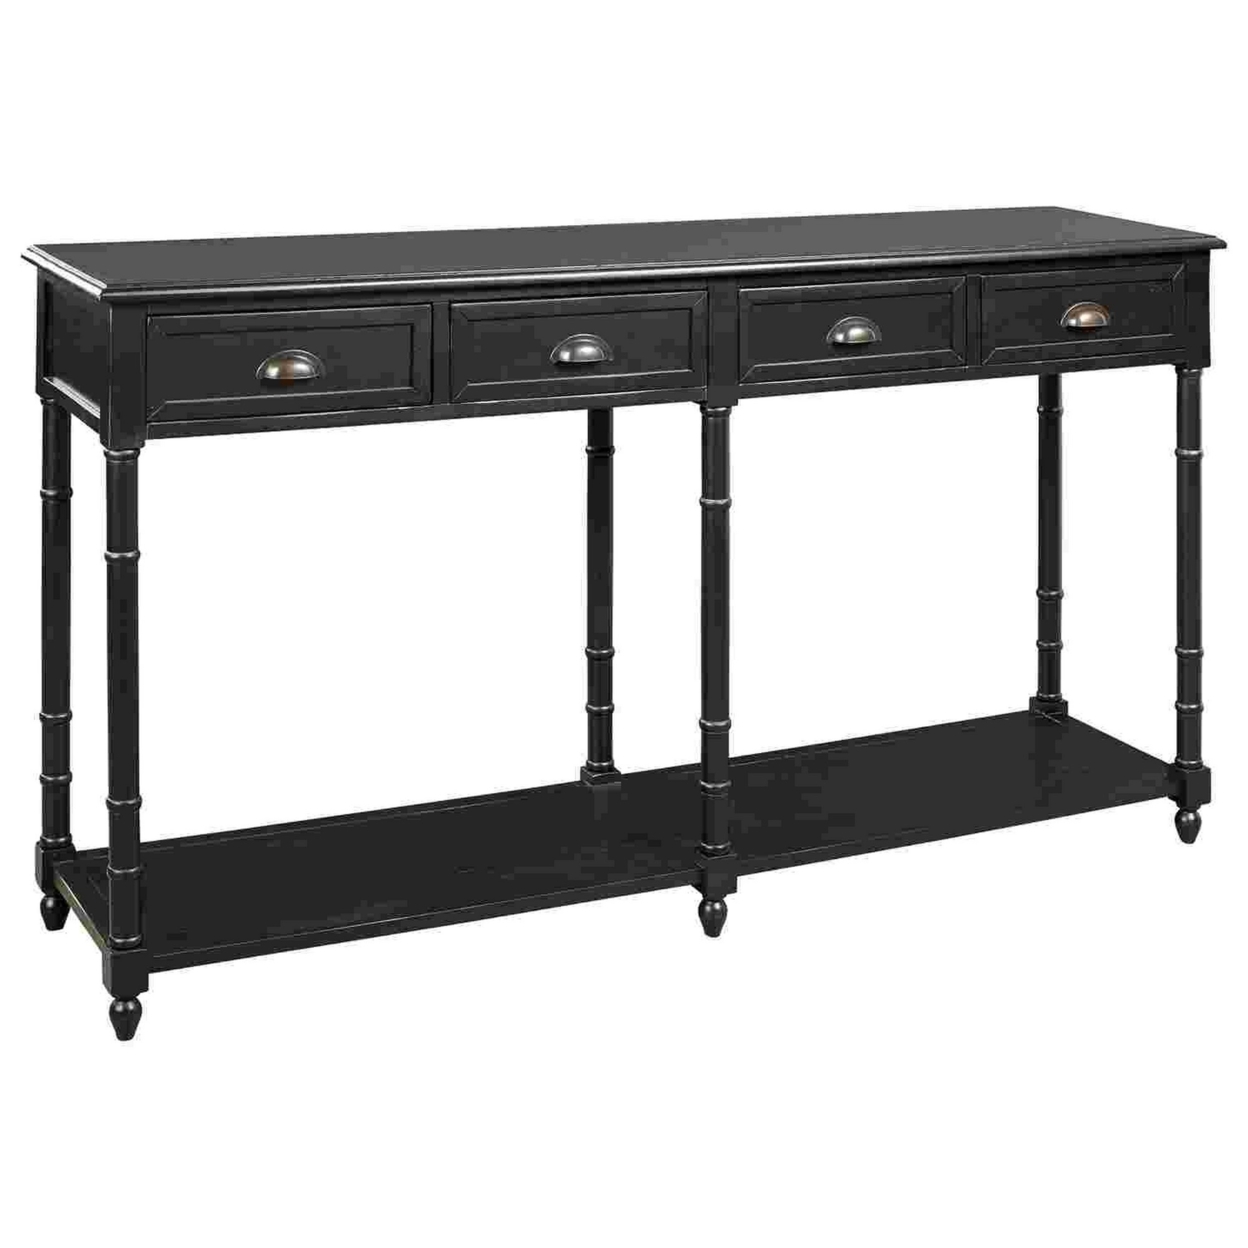 Wooden Console Sofa Table With 4 Spacious Drawers, Black- Saltoro Sherpi